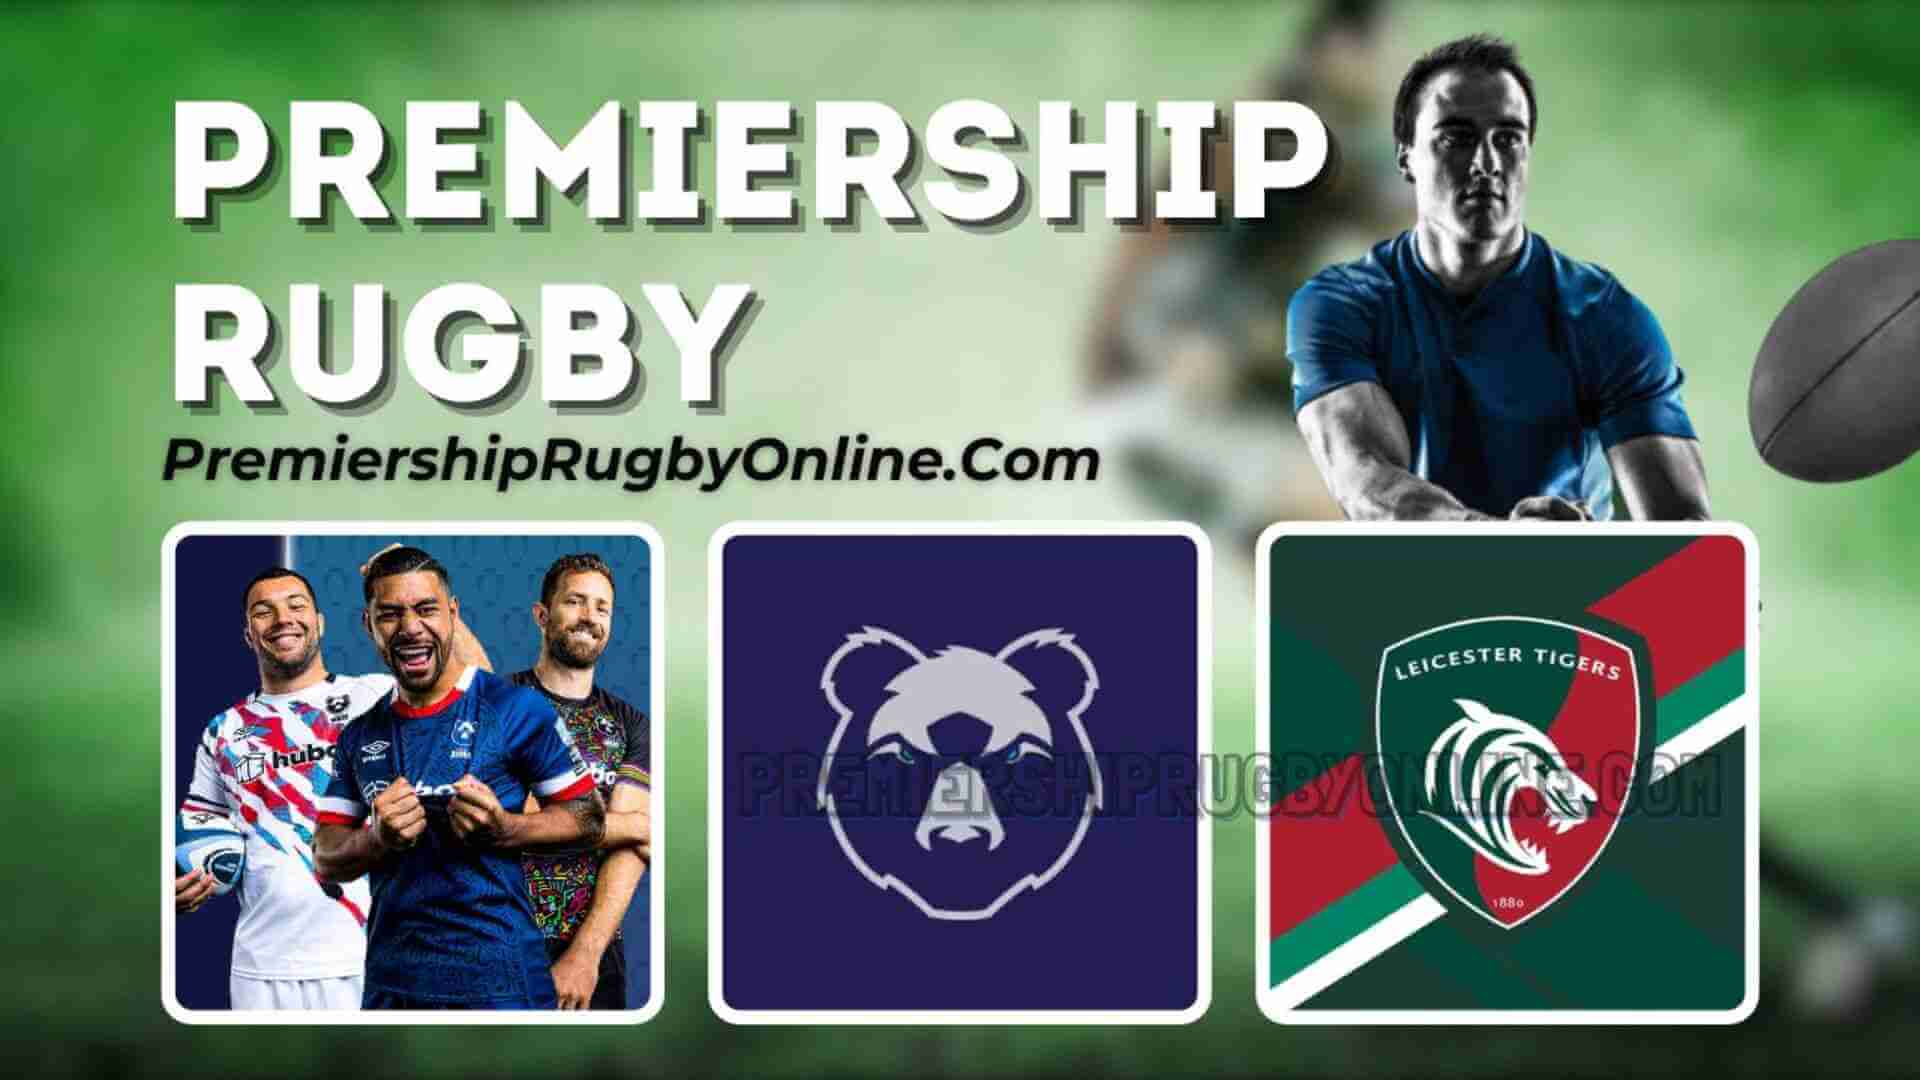 Watch Bristol Vs Leicester Rugby Live